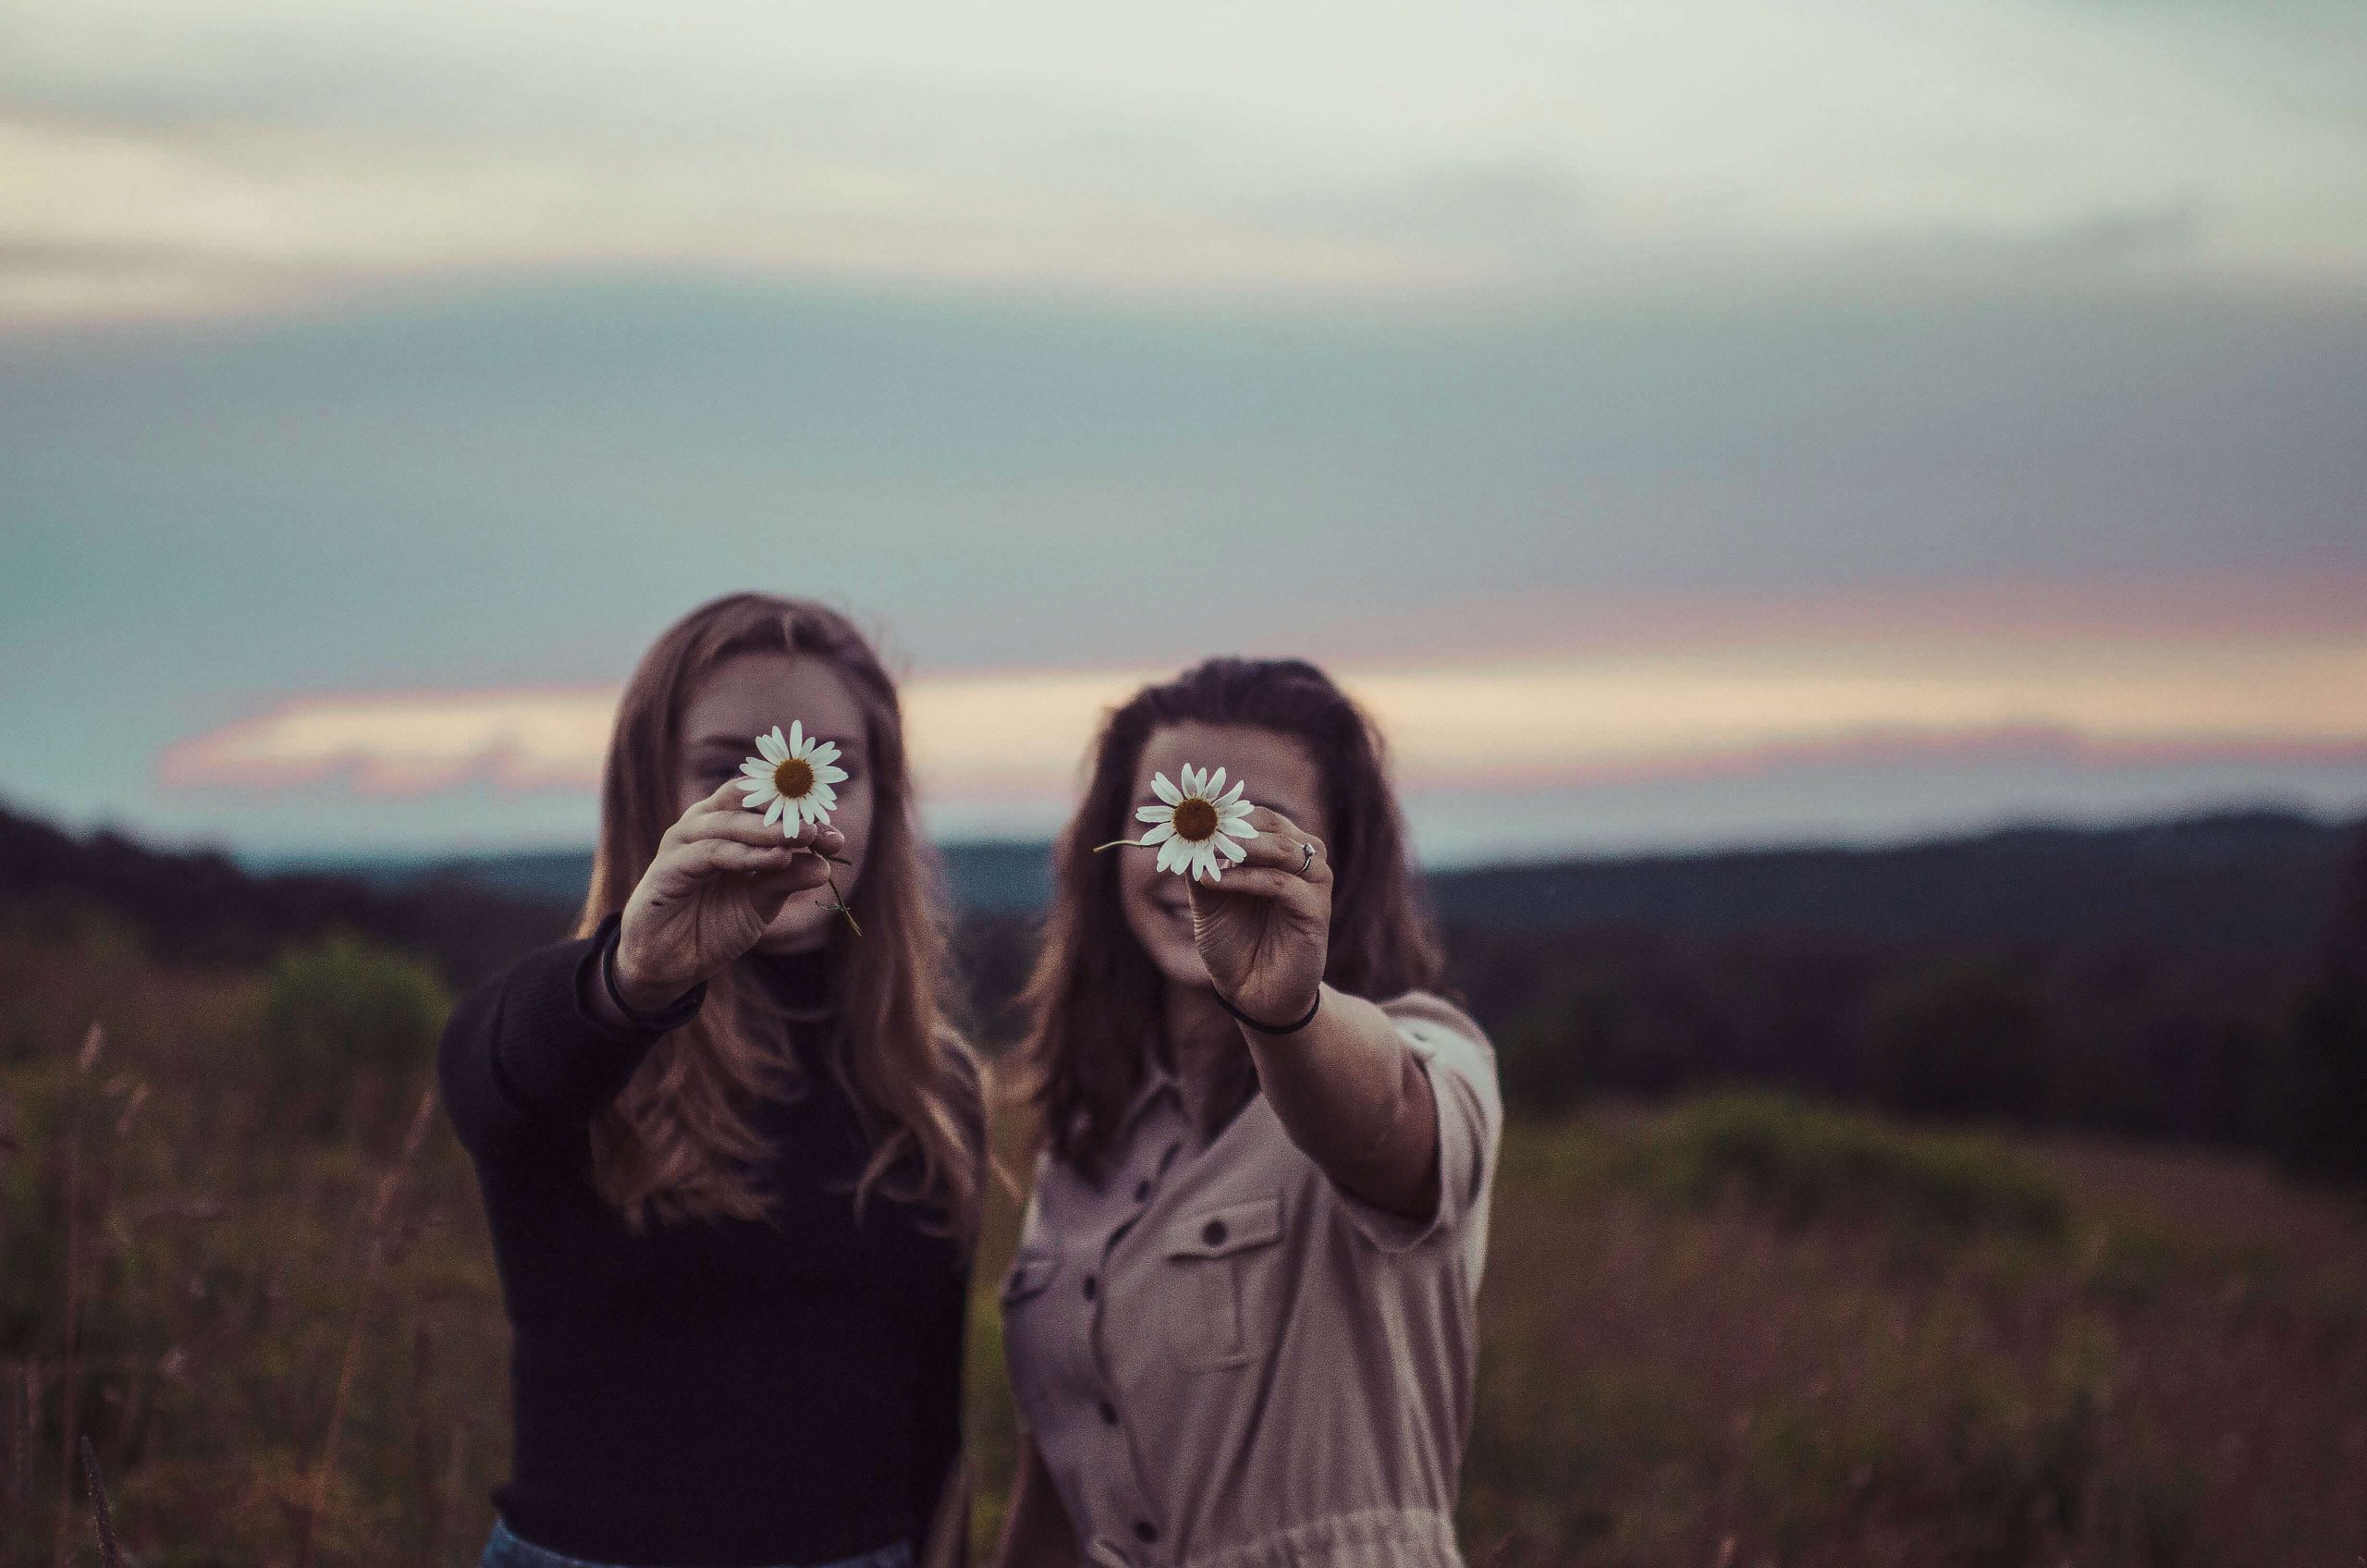 80 Tumblr Best Friend Phrases: She deserves all your LOVE and AFFECTION!